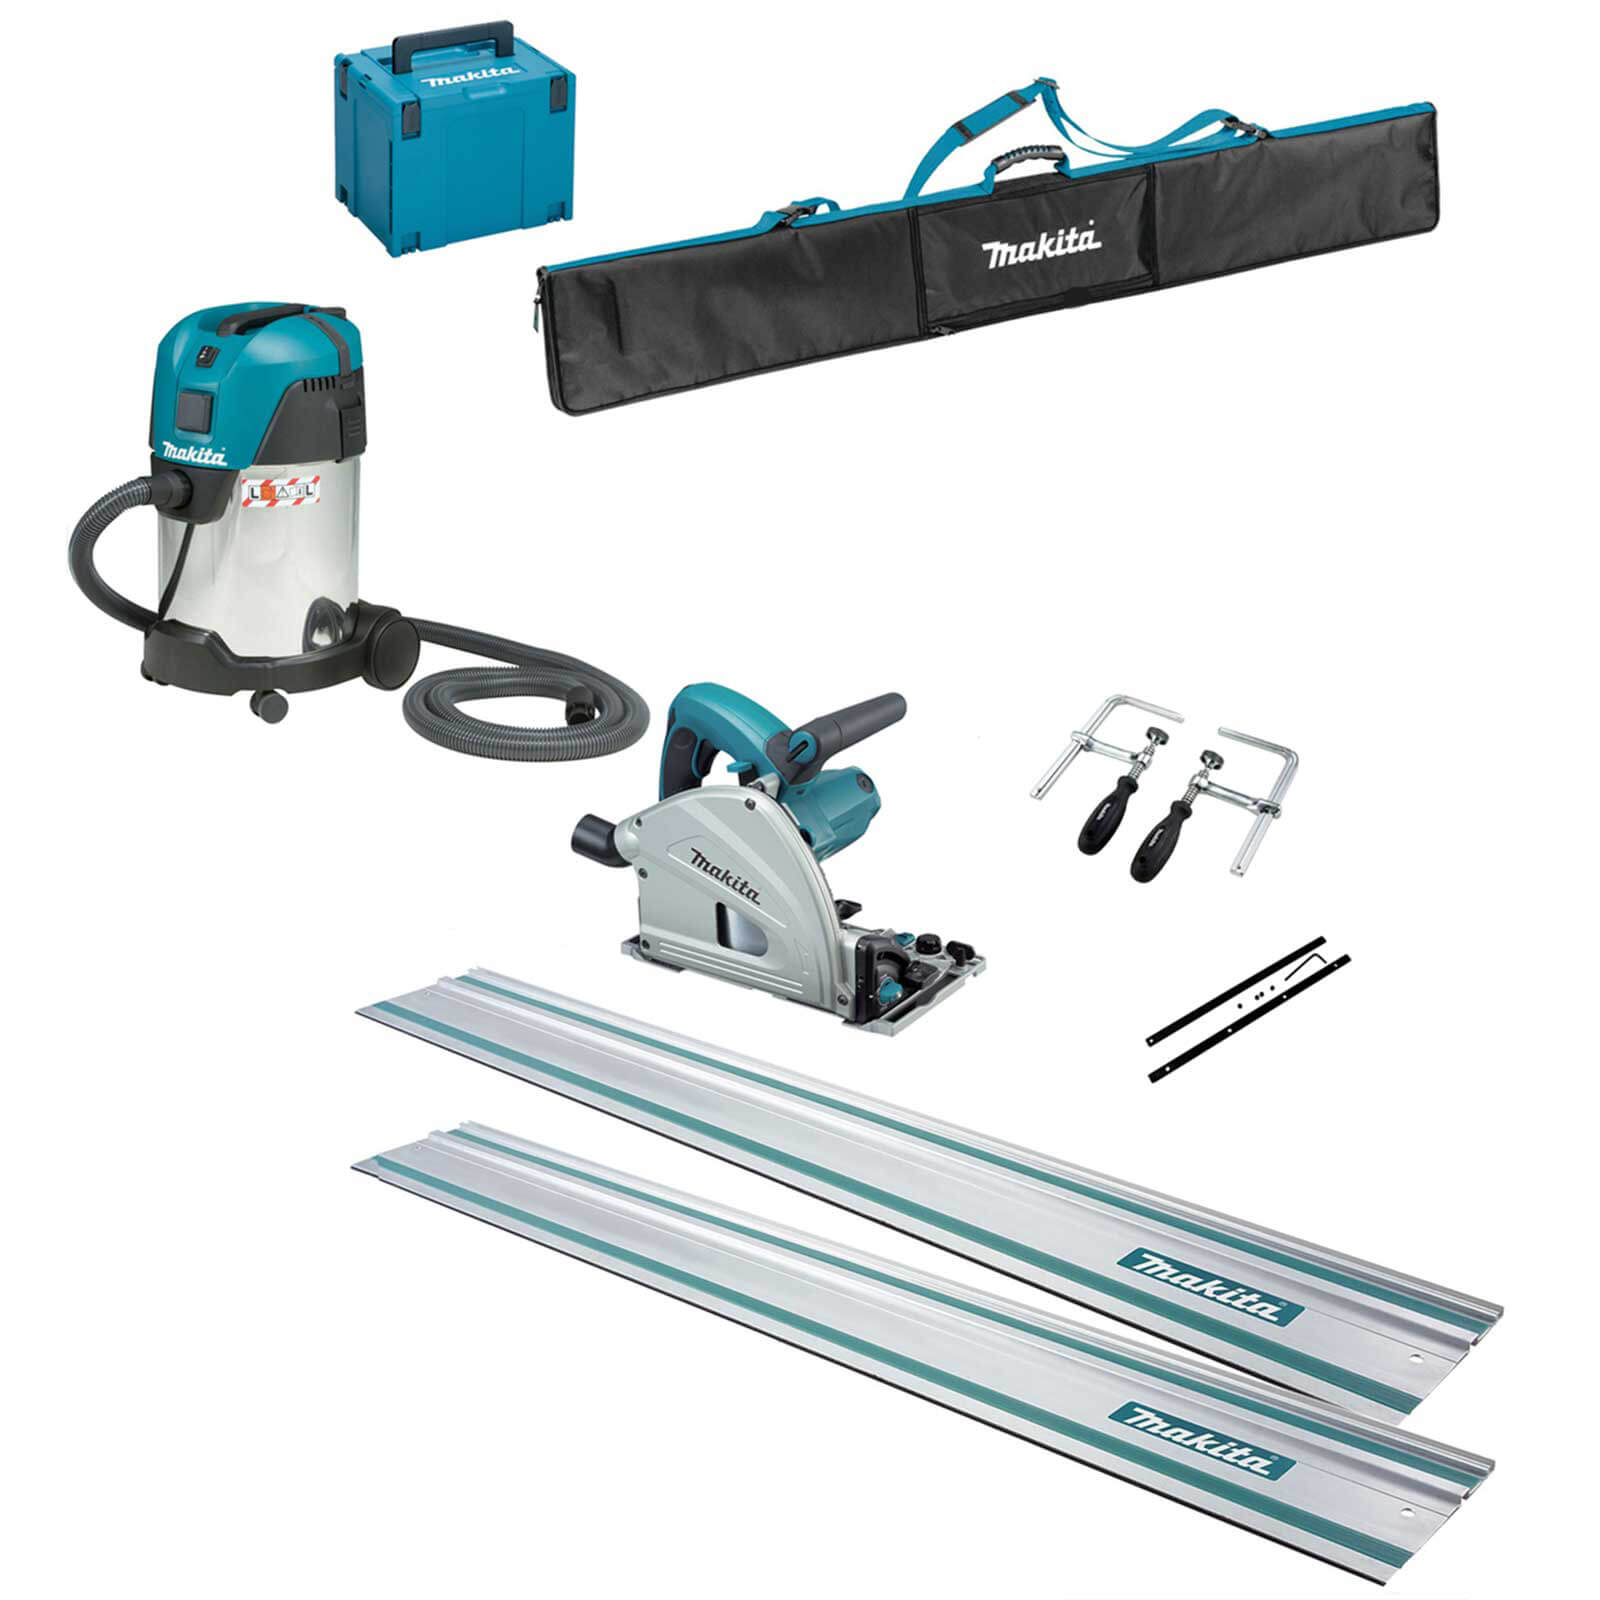 Image of Makita SP6000K7 Plunge Cut Circular Saw and Guide Rail Accessory 7 Piece Set 110v